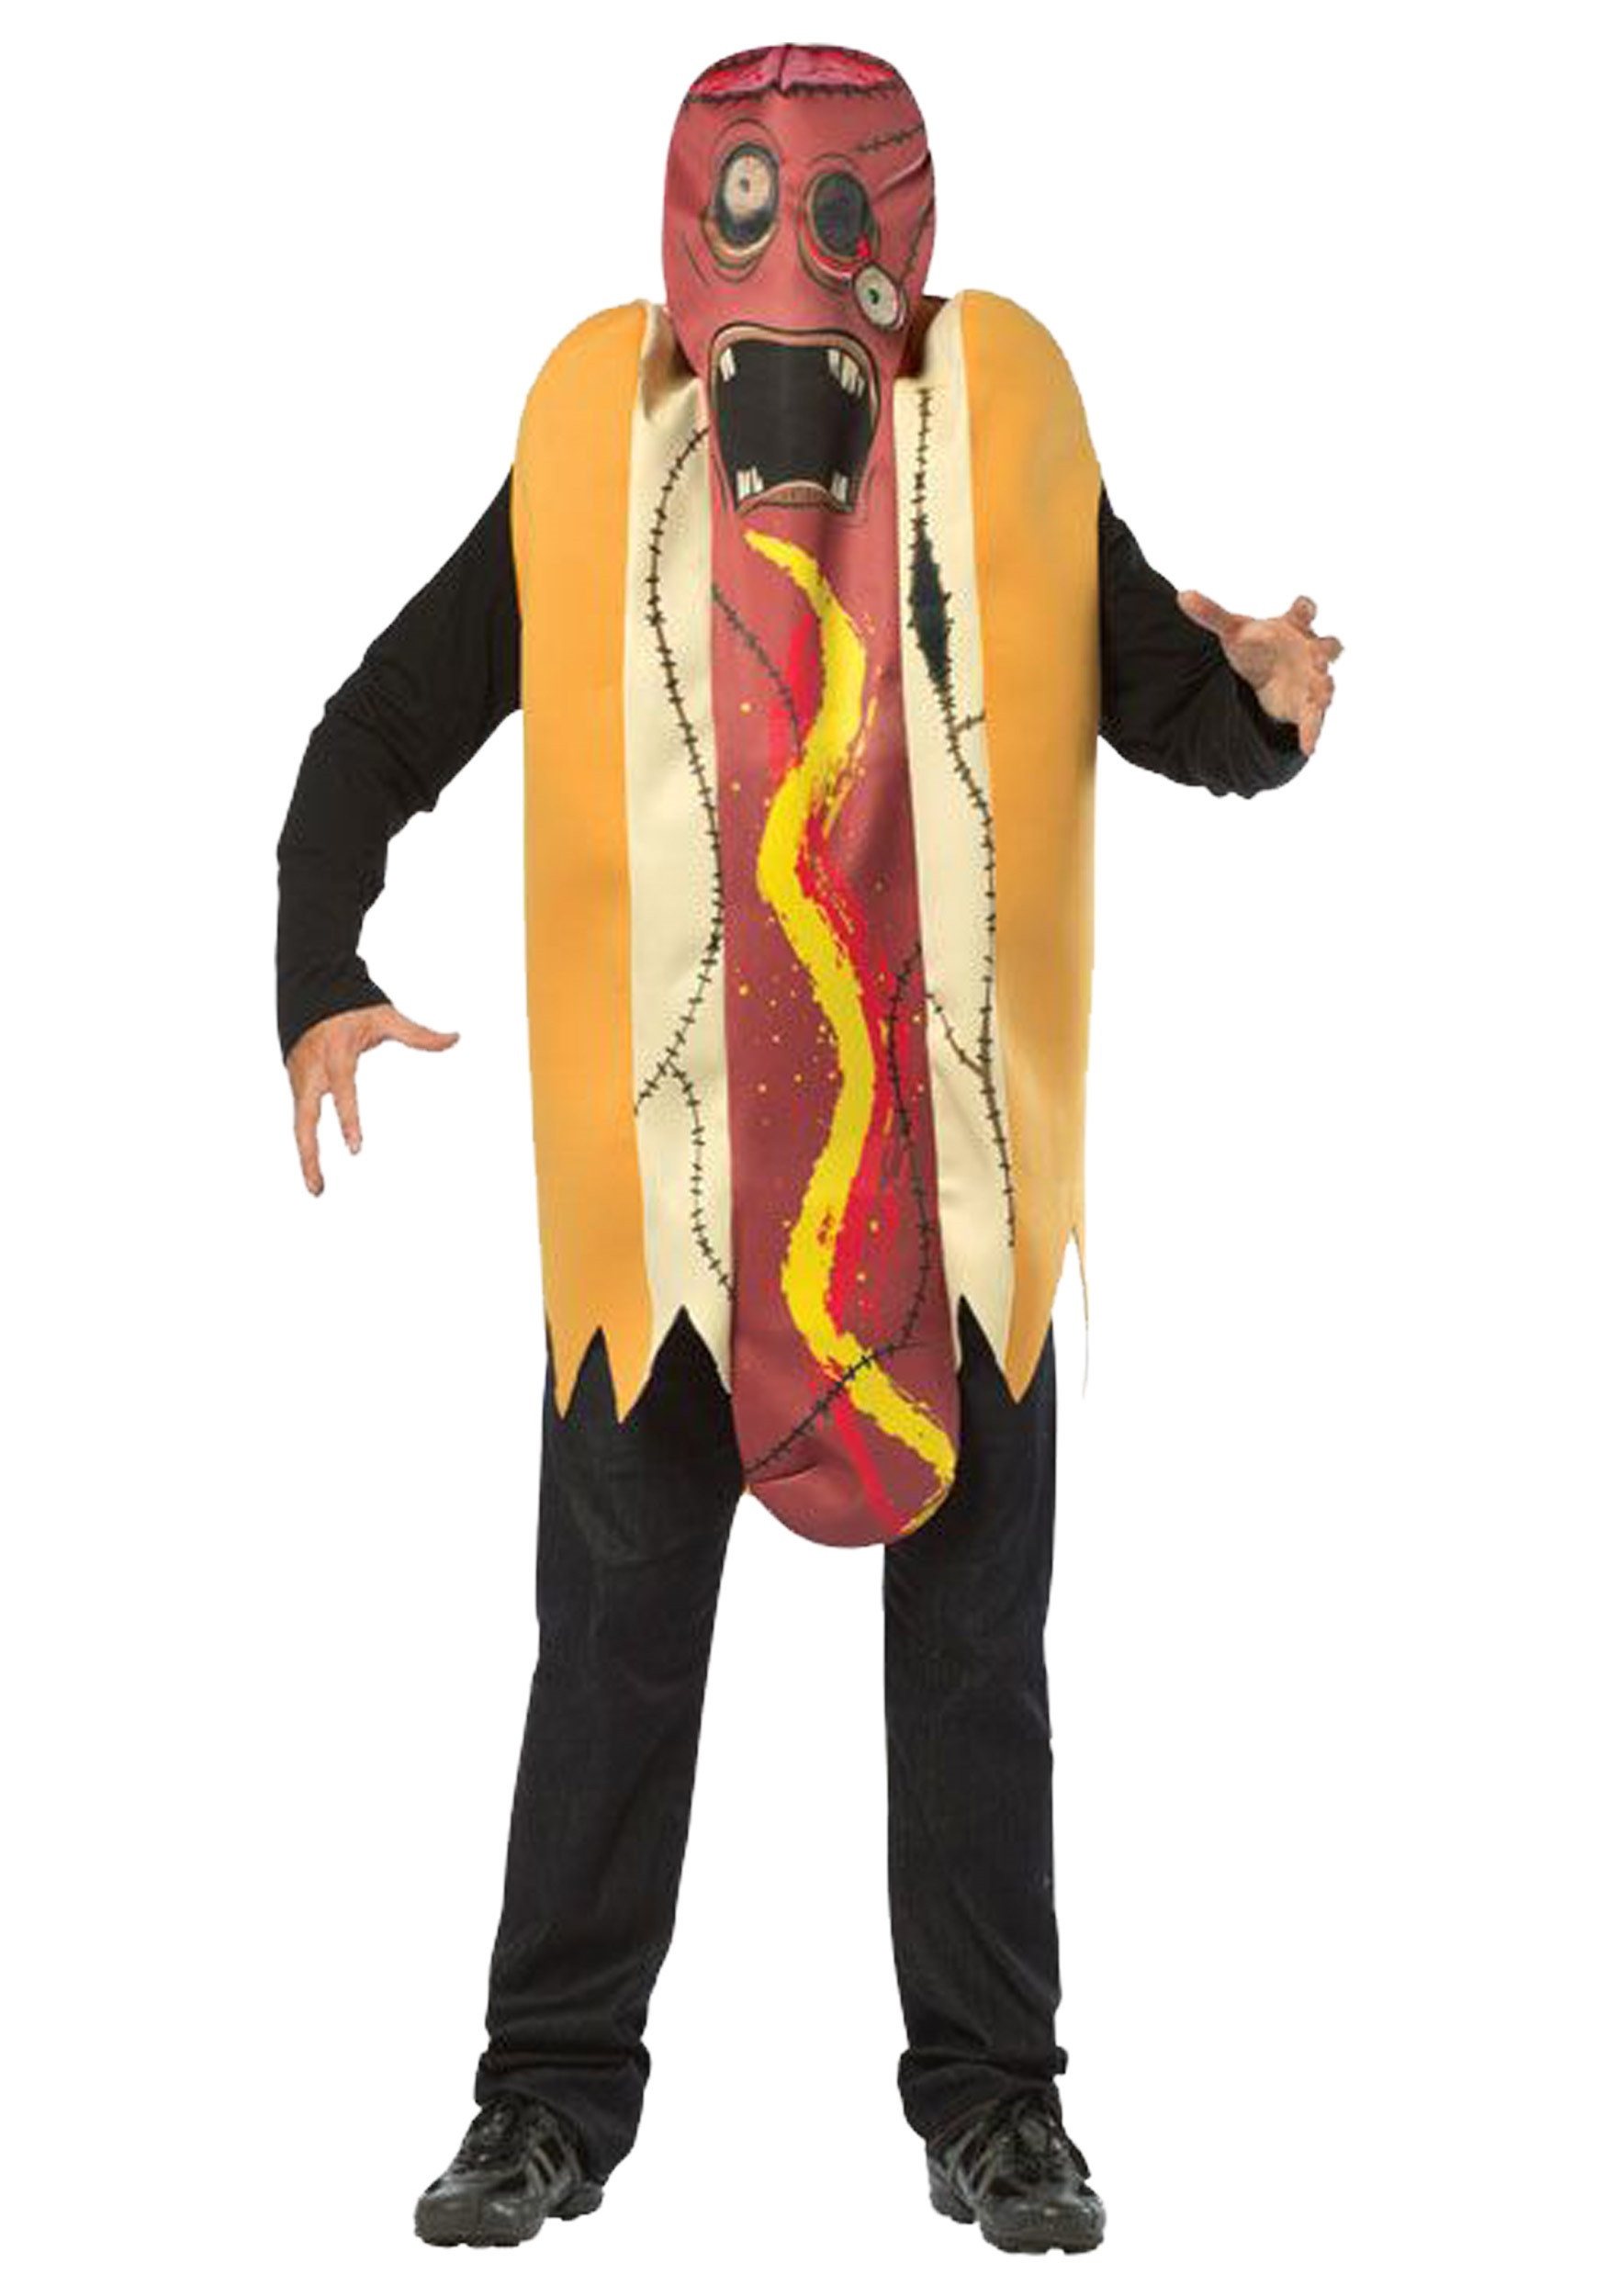 Hot Dog Halloween Costumes For Dogs
 Adult Zombie Hot Dog Costume